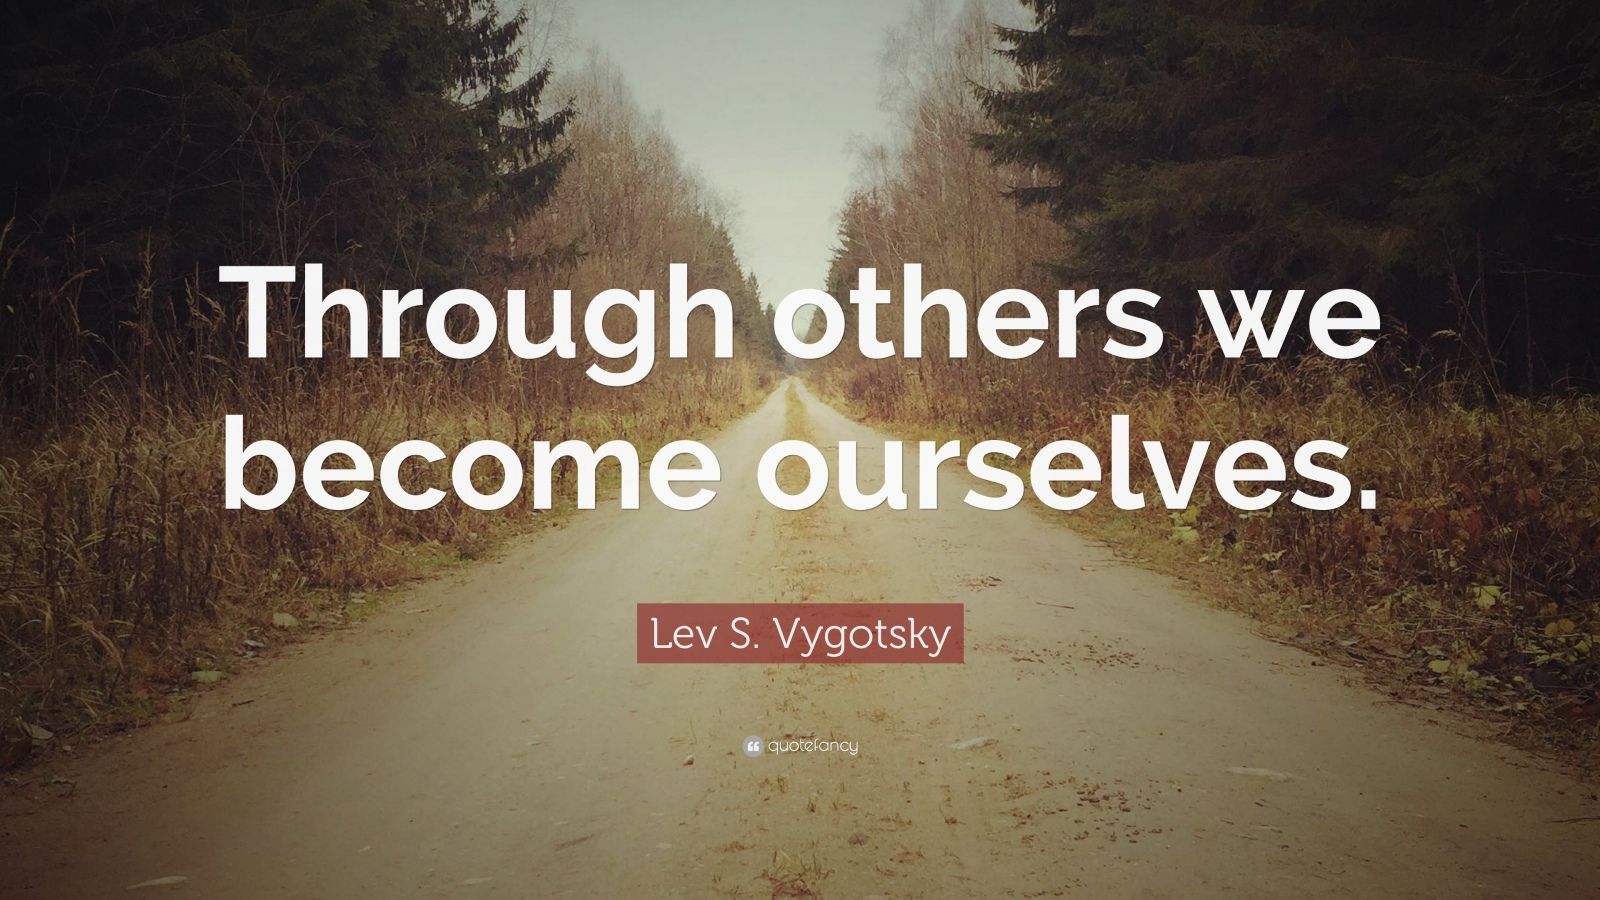 Lev S. Vygotsky Quotes (22 wallpapers) - Quotefancy